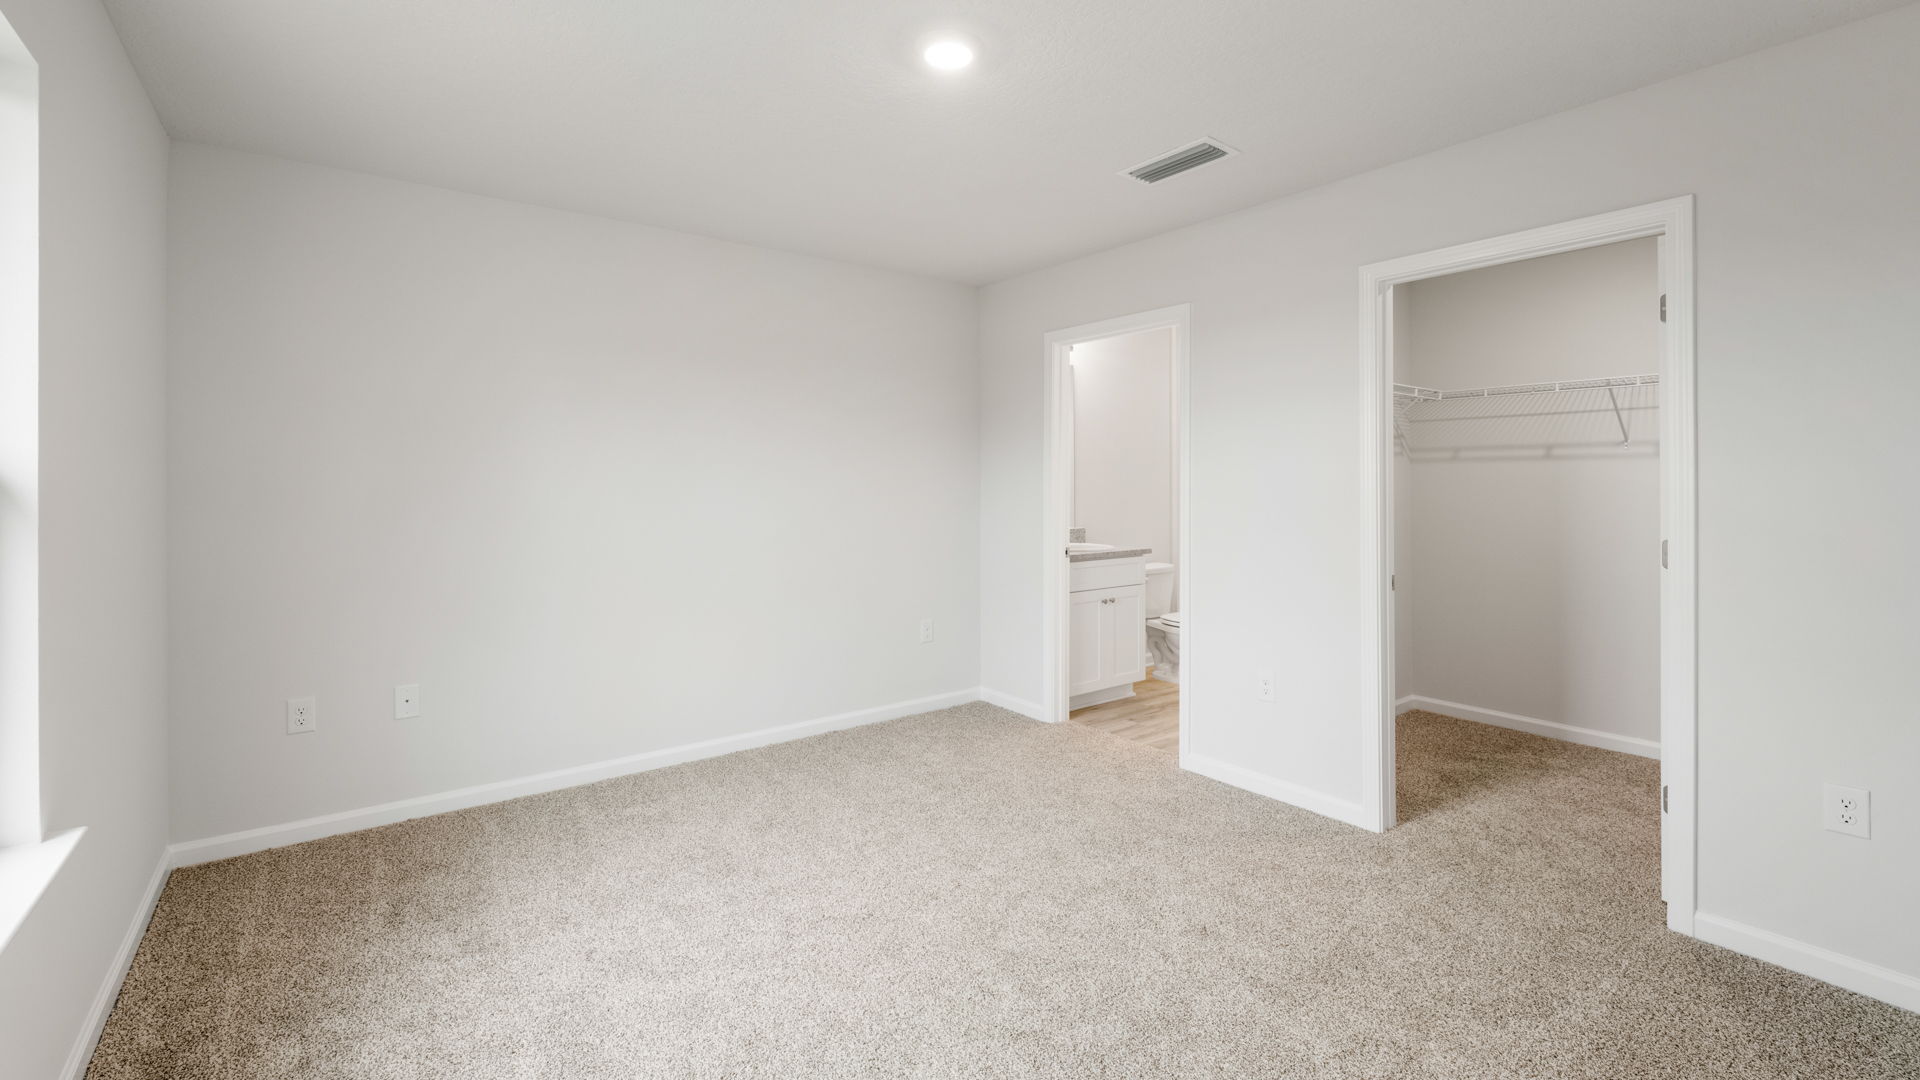 Primary bedroom with carpet floors and walk-in closet and bathroom entrance.